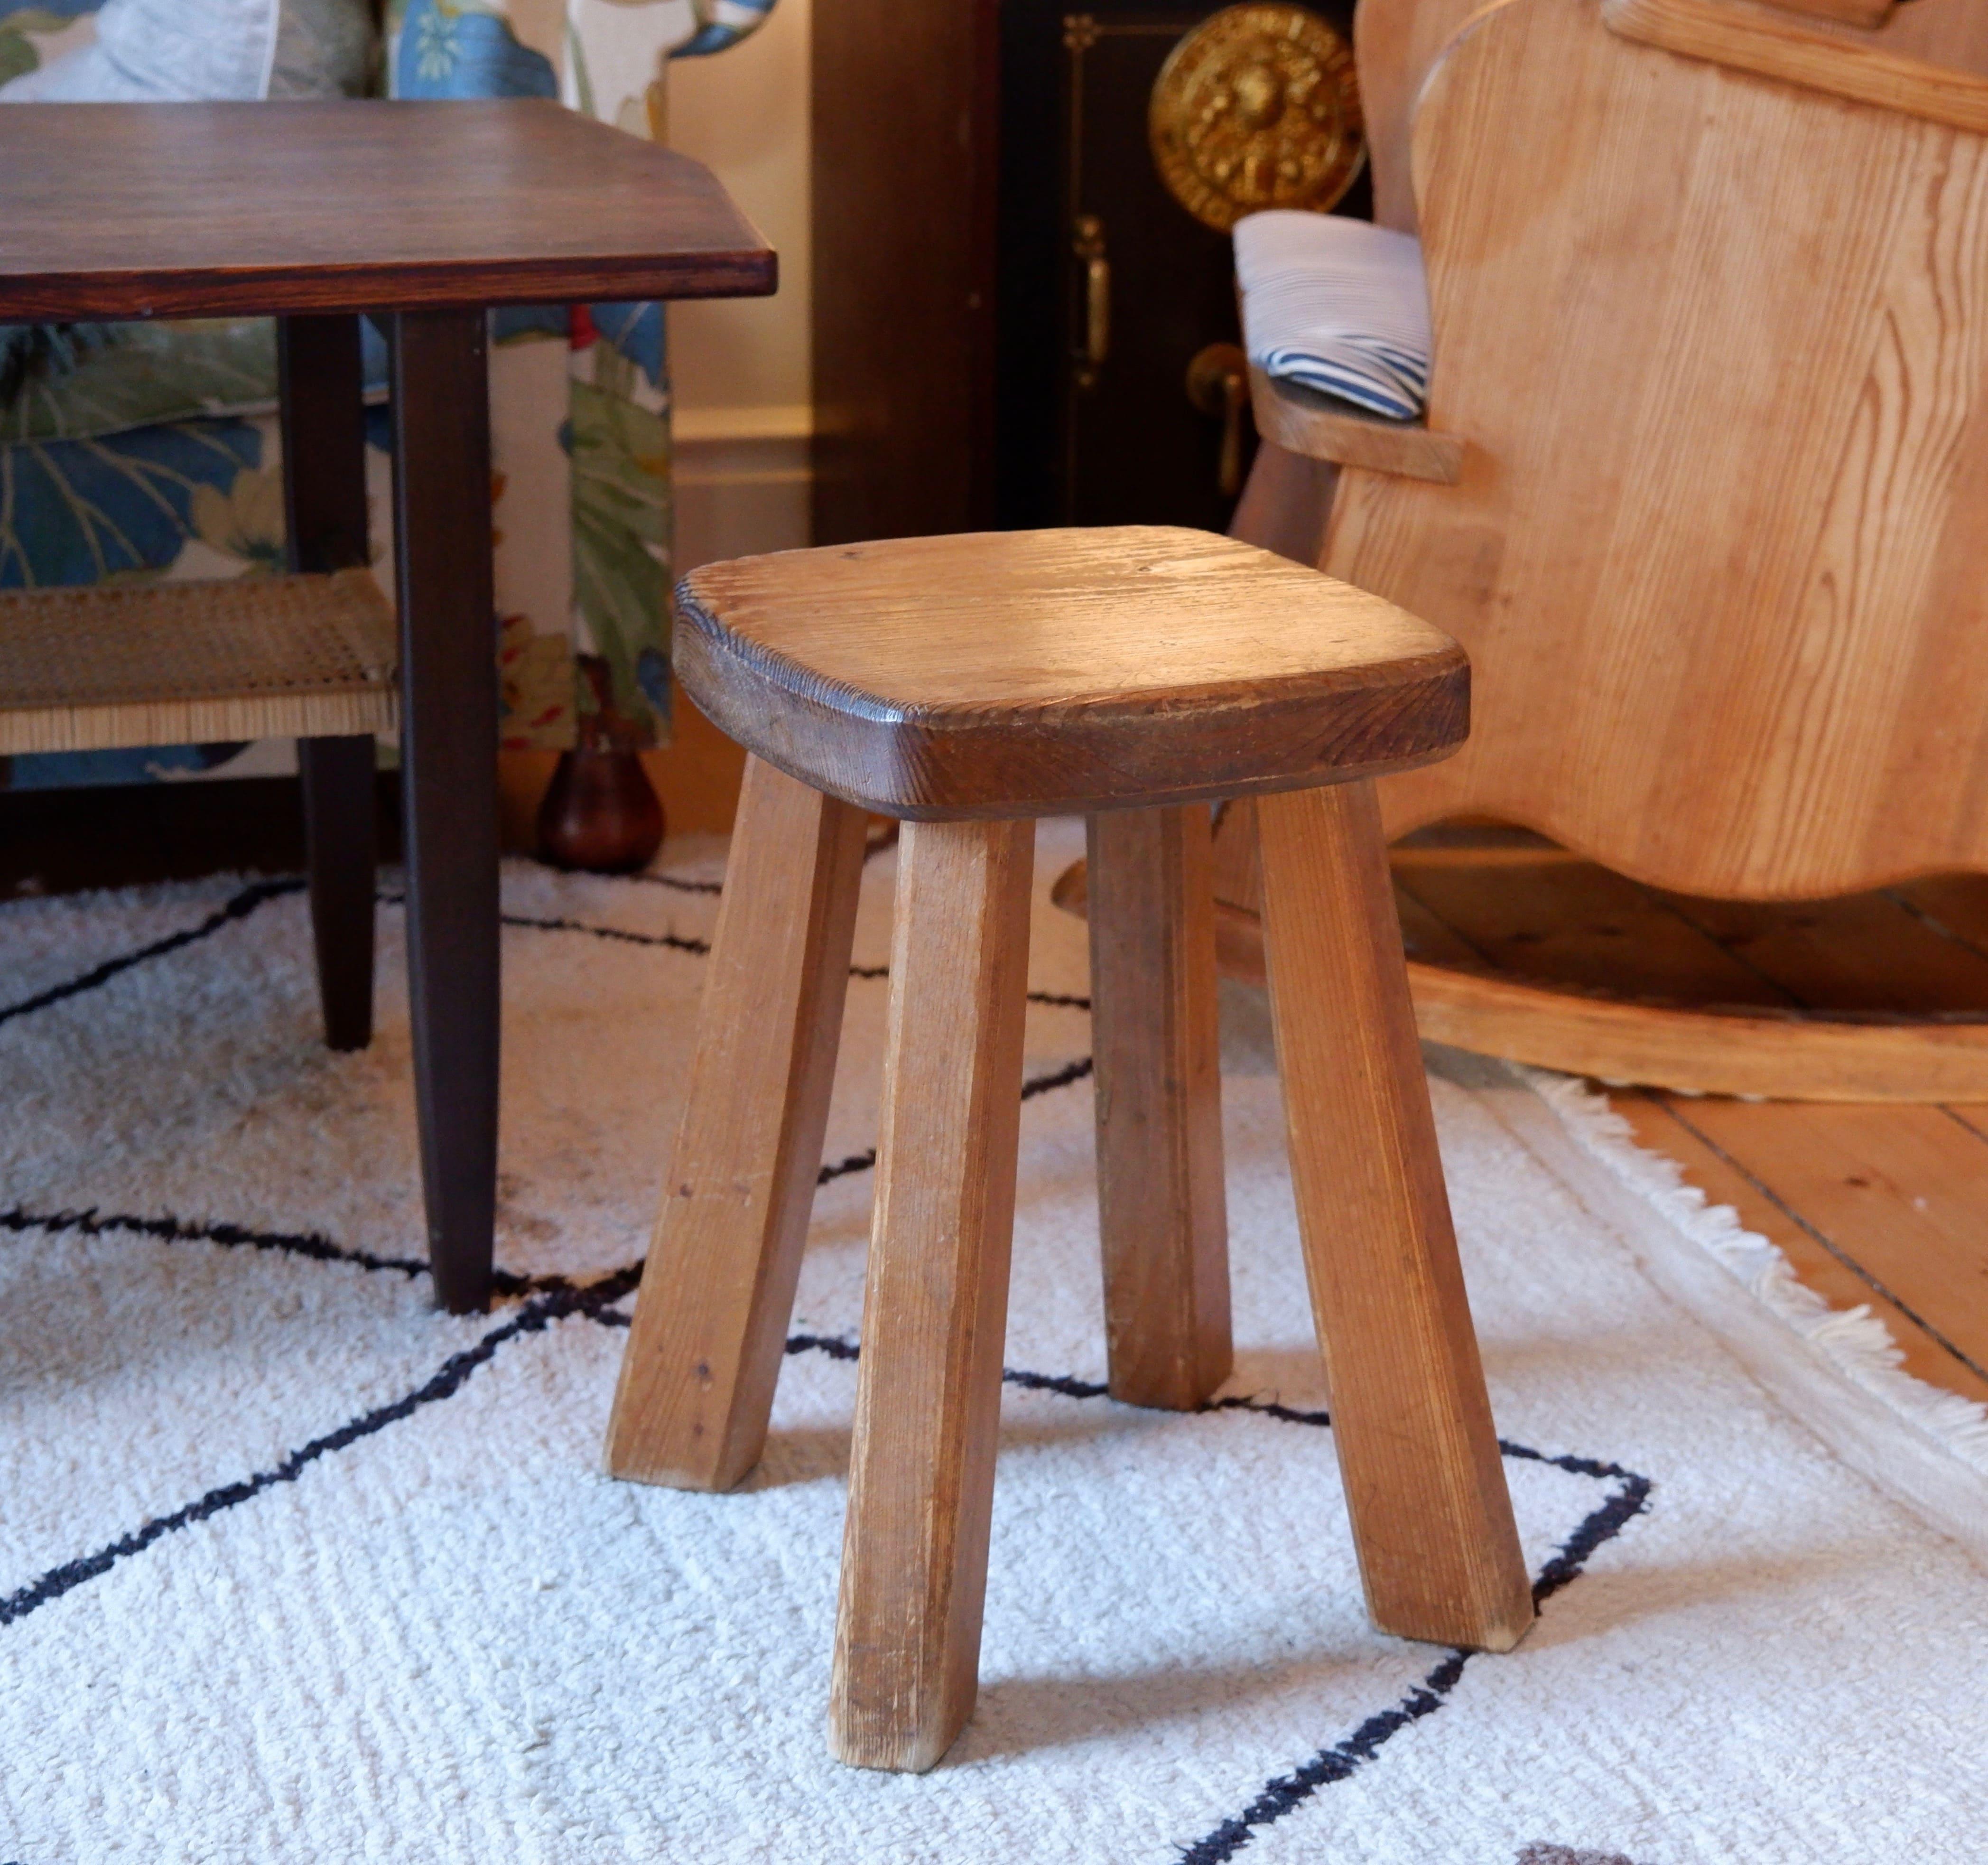 French mid century stool in the manner of the Charlotte Perriand Berger made in solid wood. The stool is in good condition and the wood has a really nice patina. Dimensions : H : 44 / L : 30 / P : 30 cm.